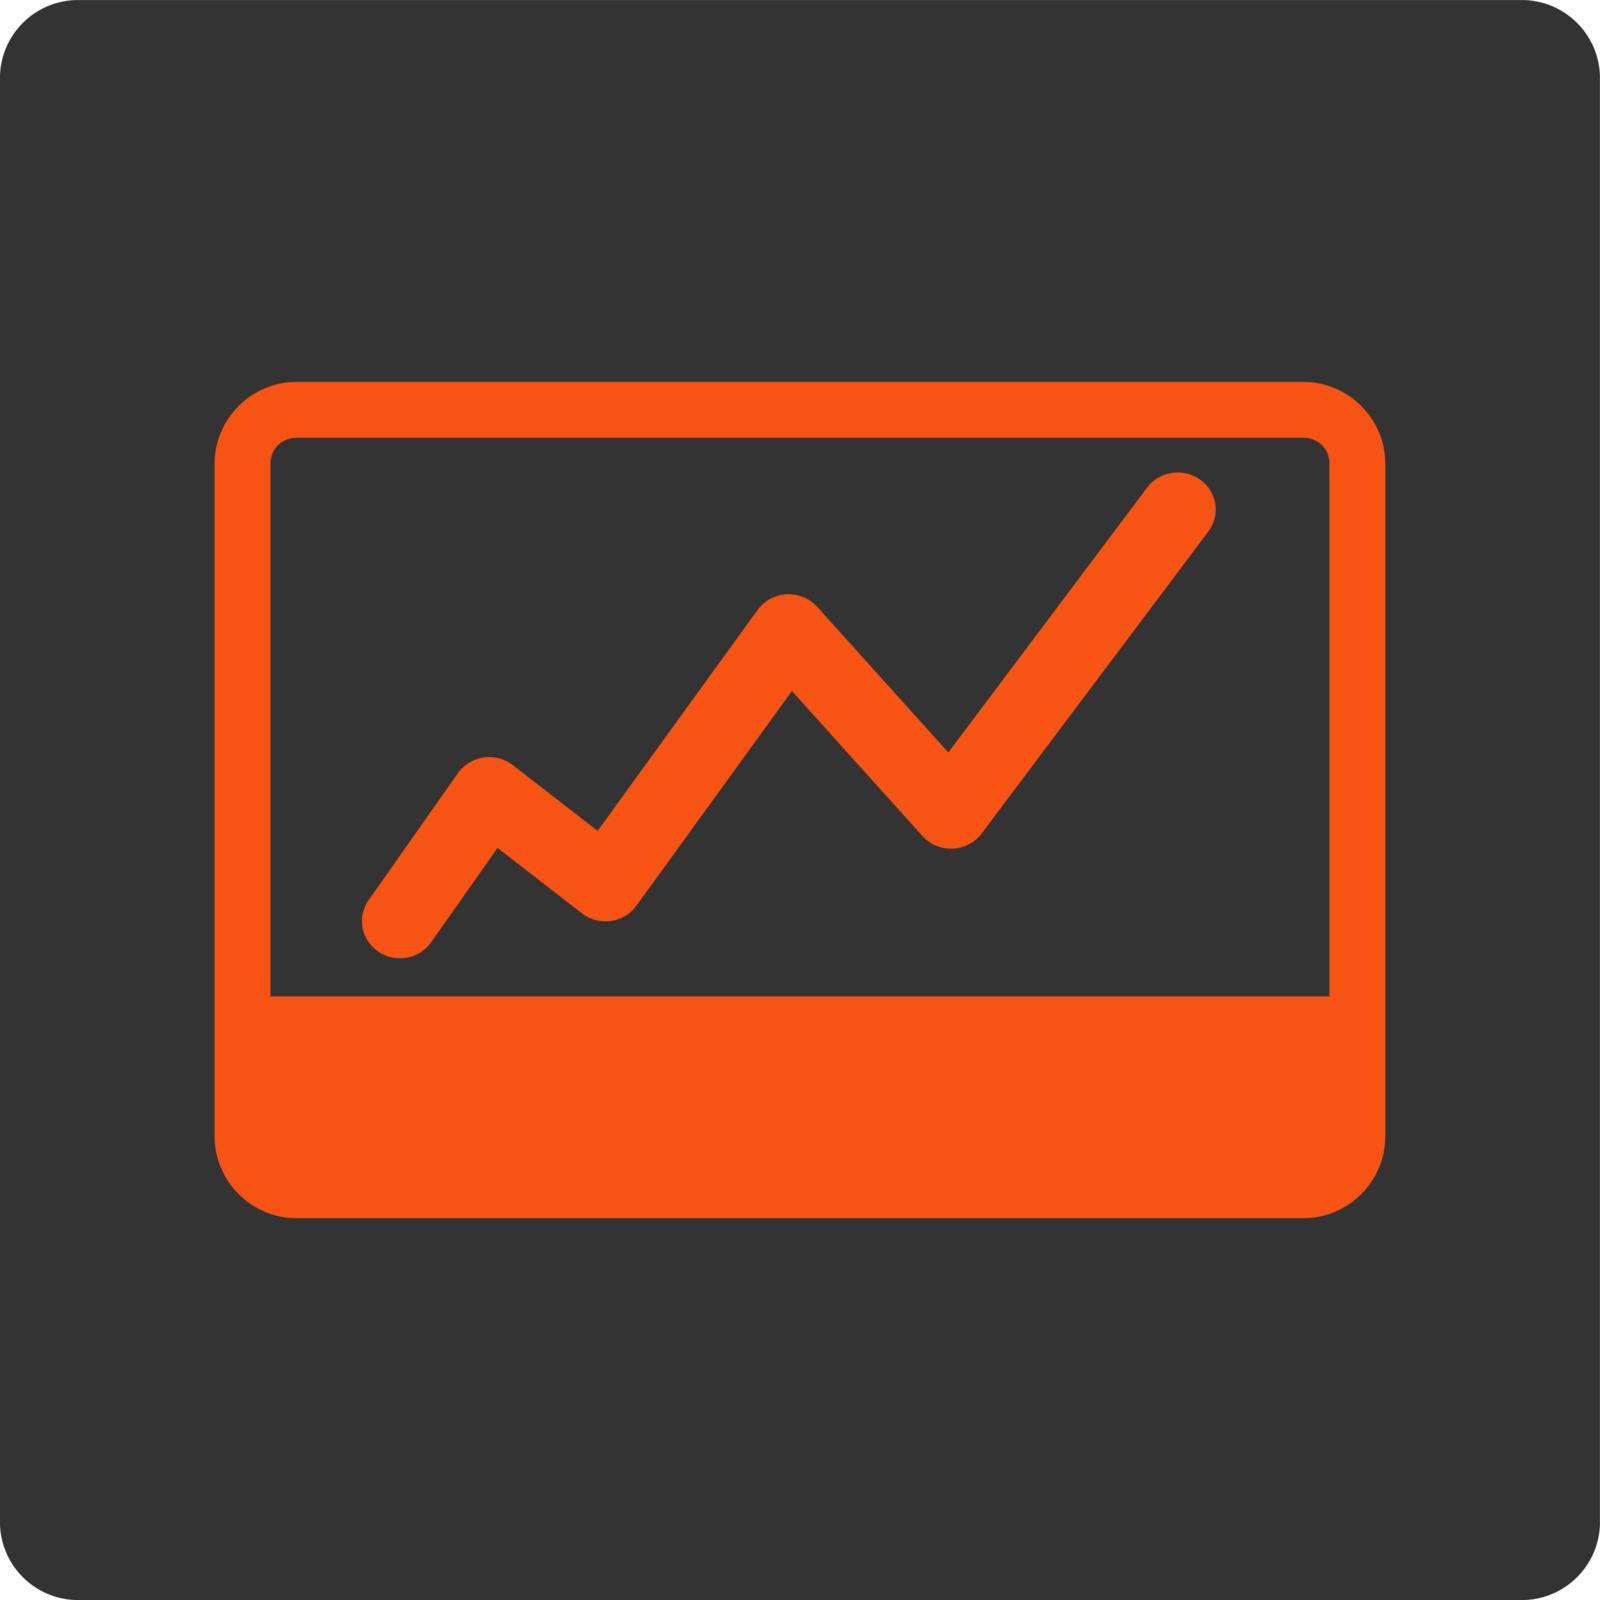 Stock Market icon by ahasoft